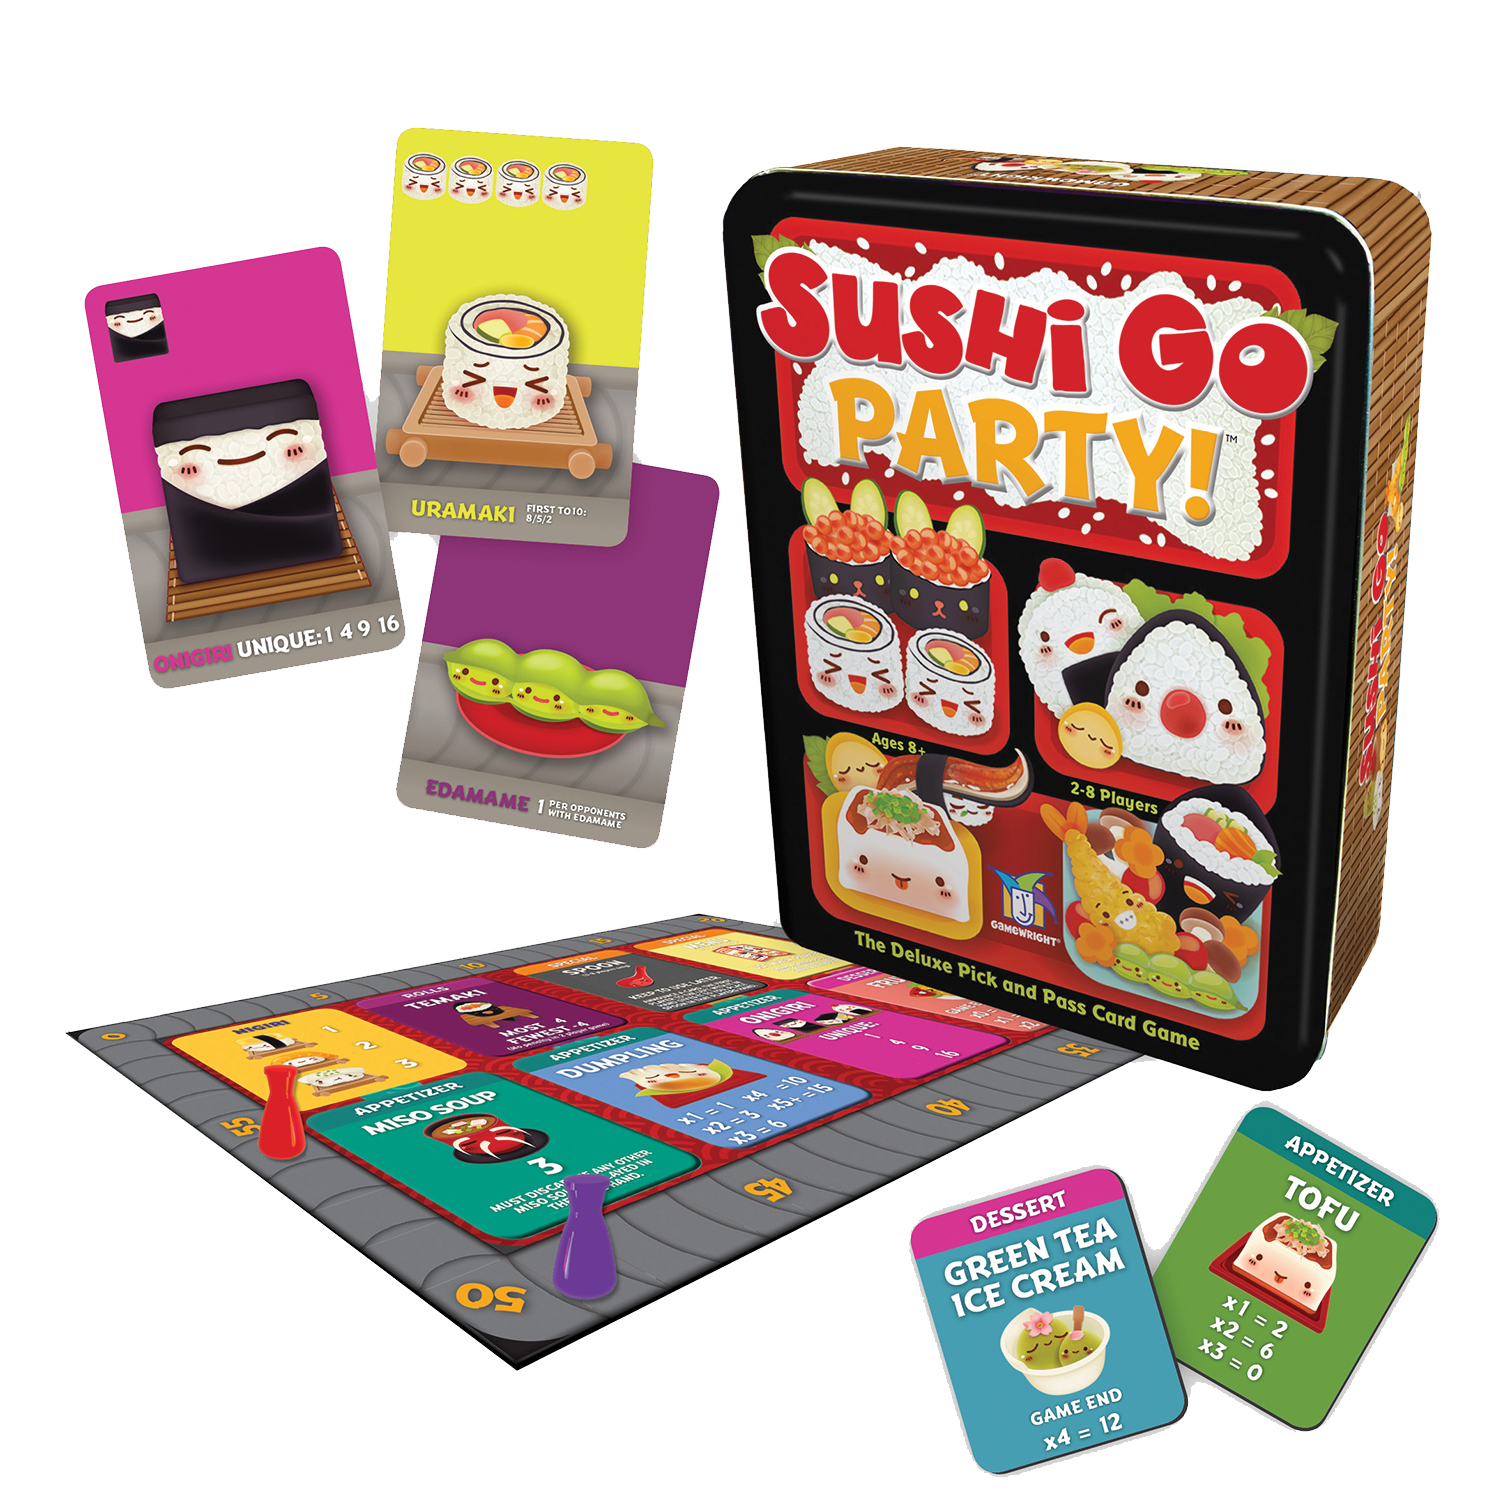 GamewrightSushi Go Party GameCard GameAges 8+2-8 Players20 